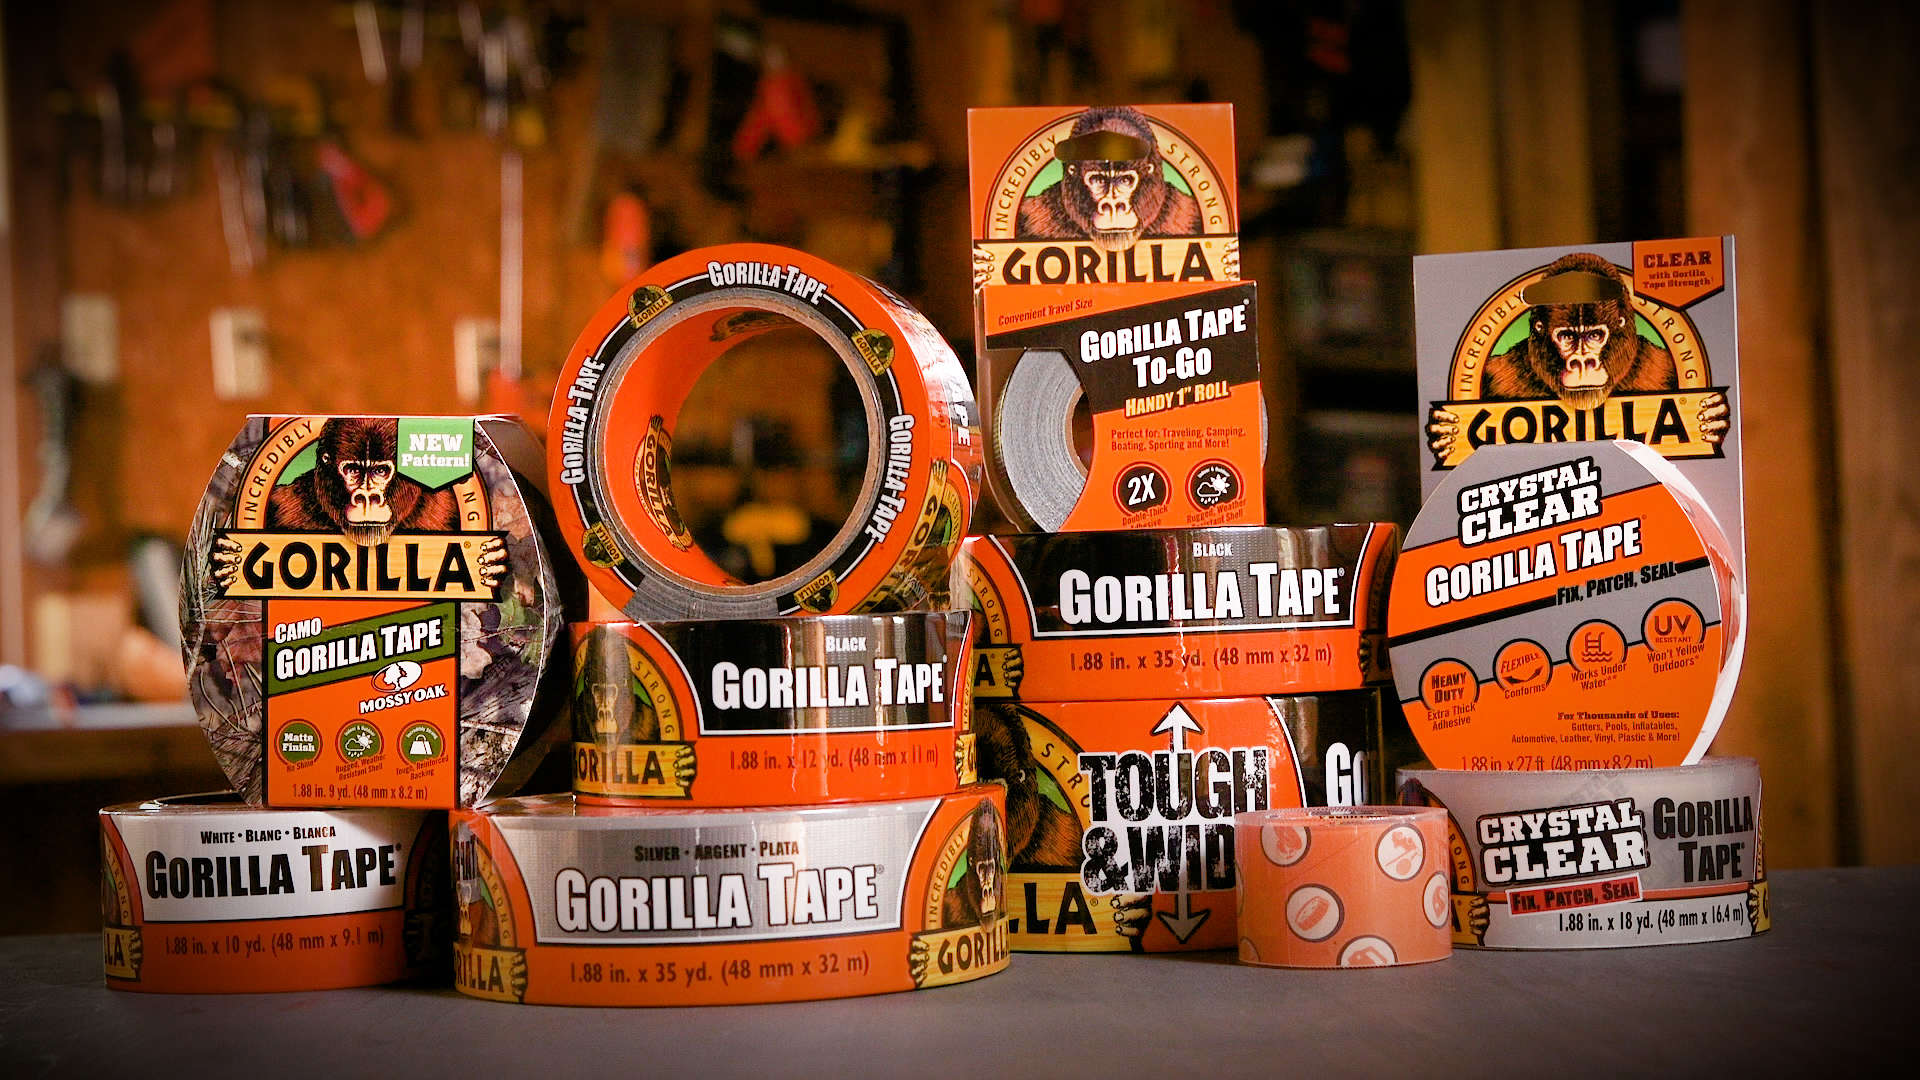 Gorilla Tough & Clear Double Sided Mounting Tape, 1 Inch x 60